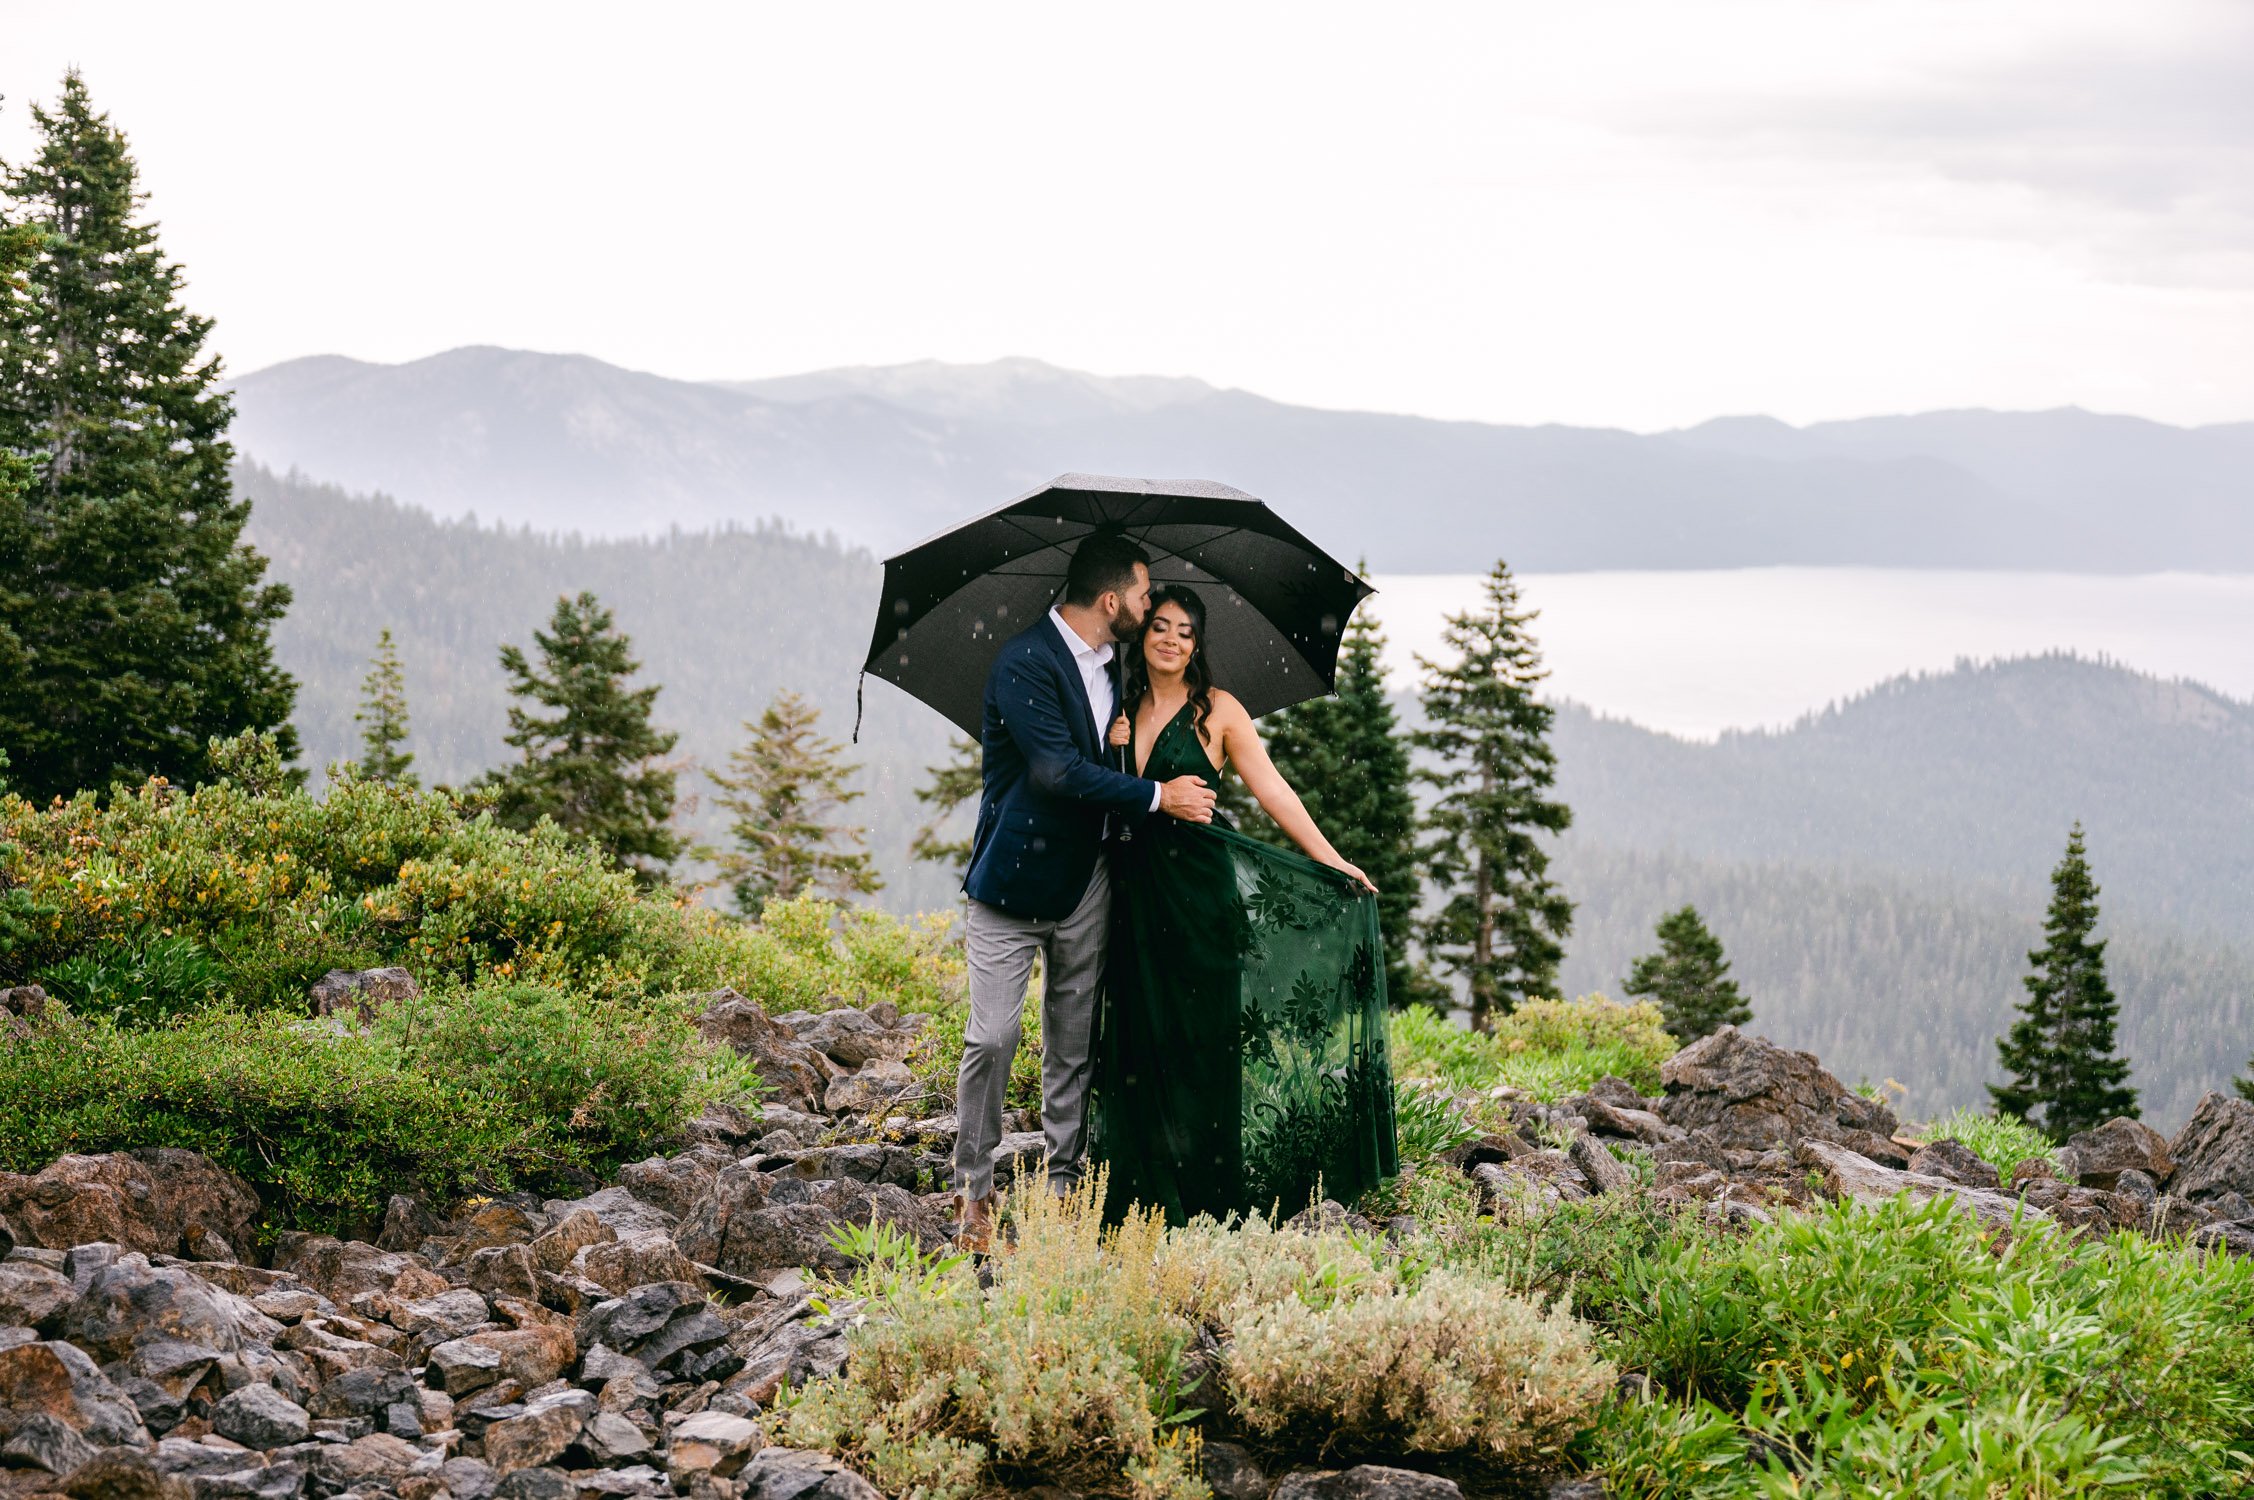 Lake Tahoe Engagement photos, photo of couple under an umbrella during some rain showers